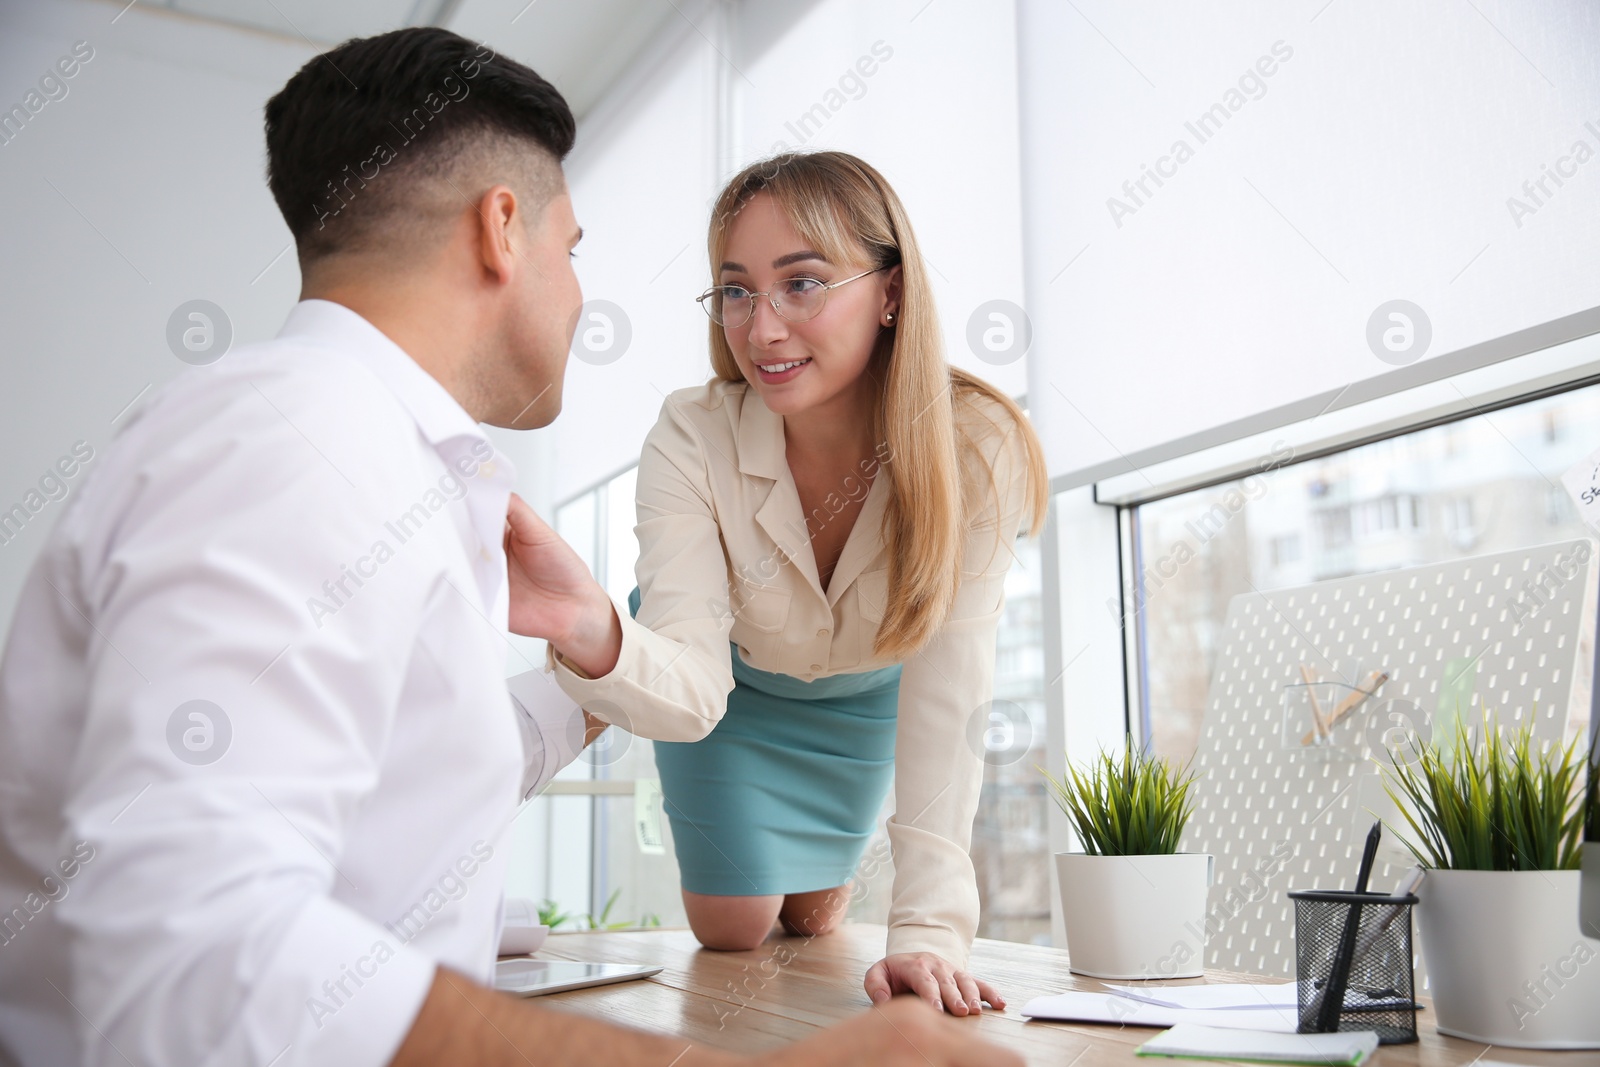 Photo of Colleagues flirting with each other during work in office